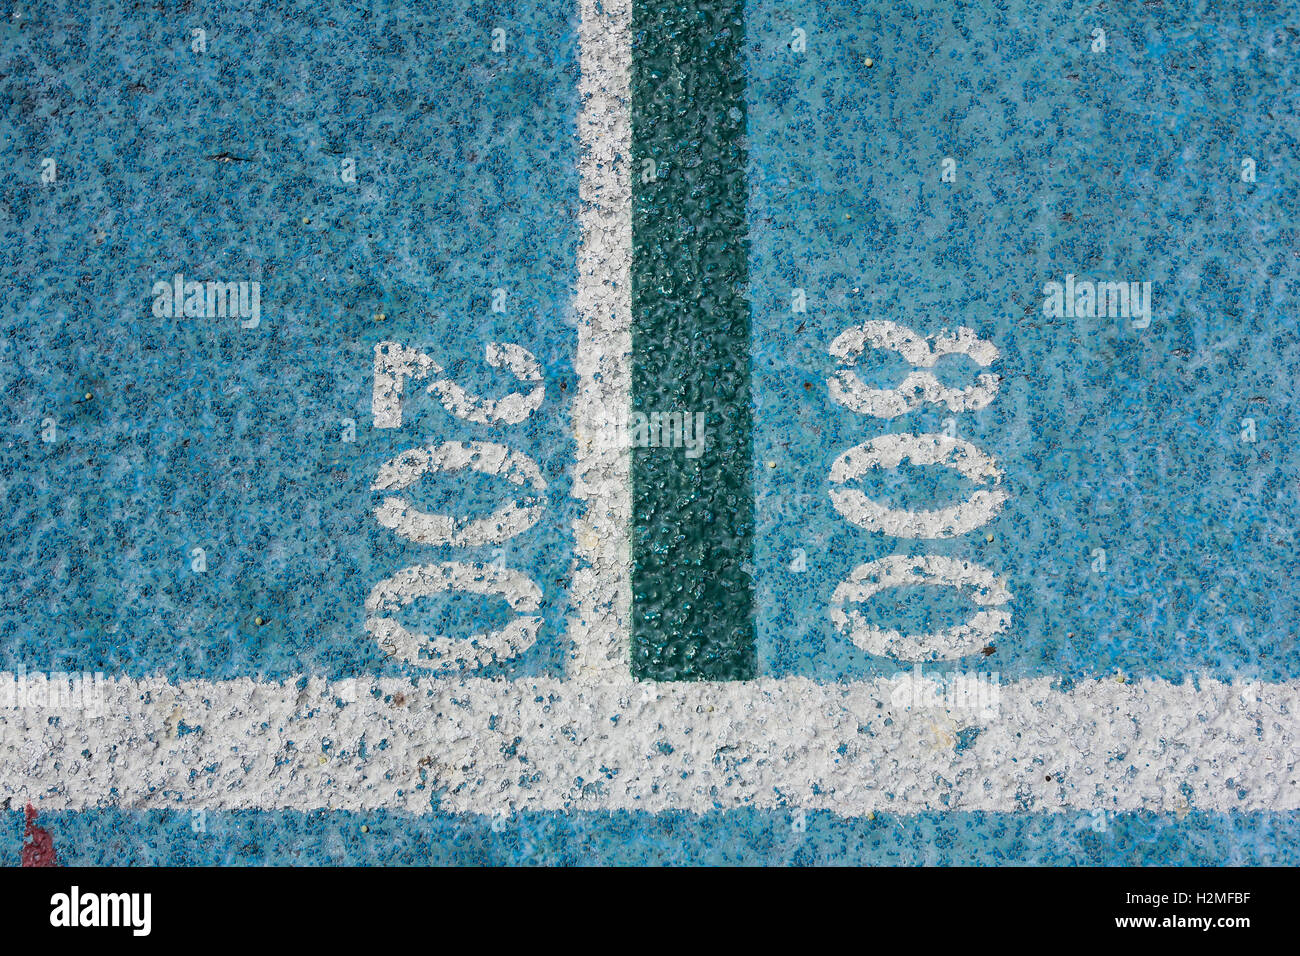 Measurement numbers on a blue all-weather running track.   1600, 3200, 10000 meters. Stock Photo